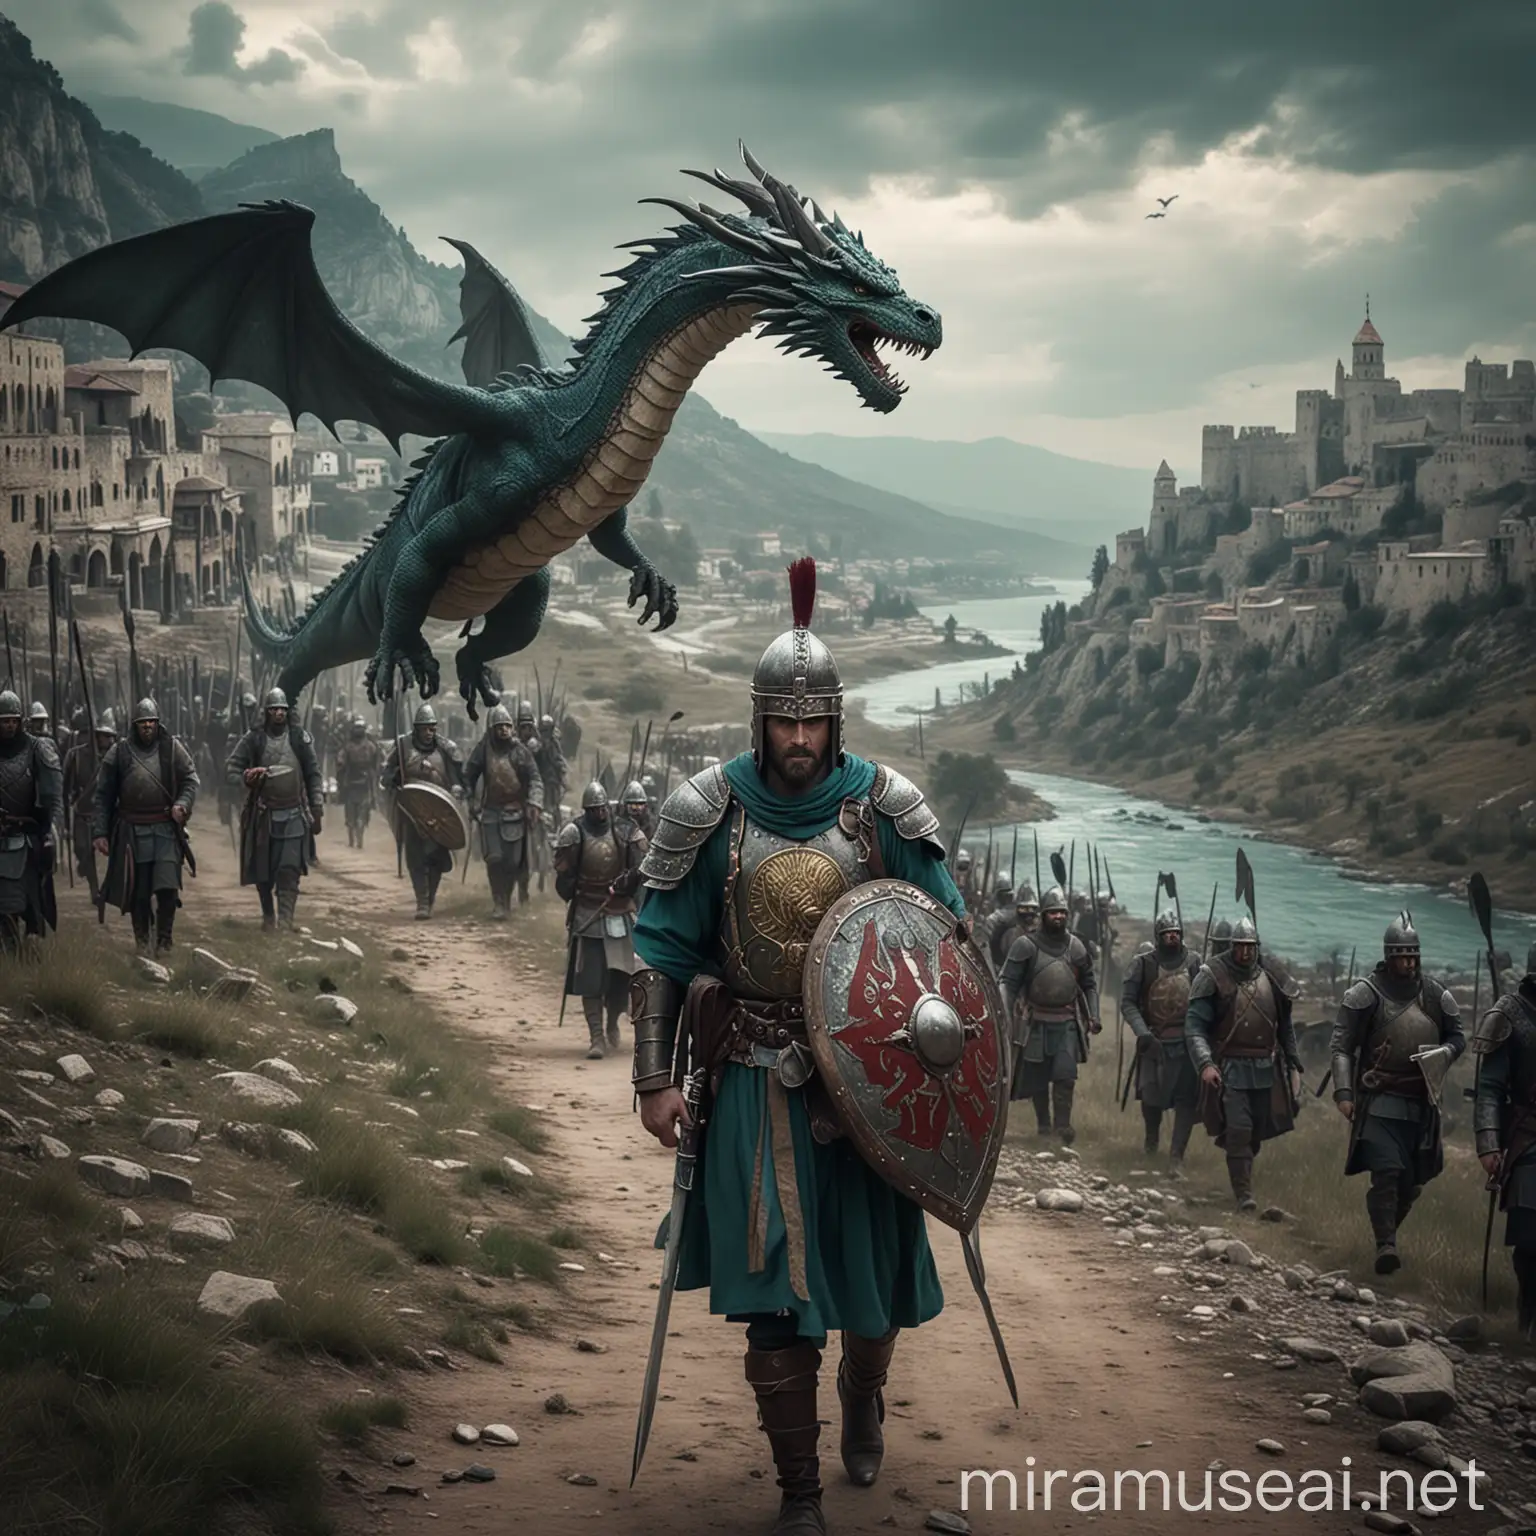 Varangian Guard Marching Through Valley with Dragon Overhead